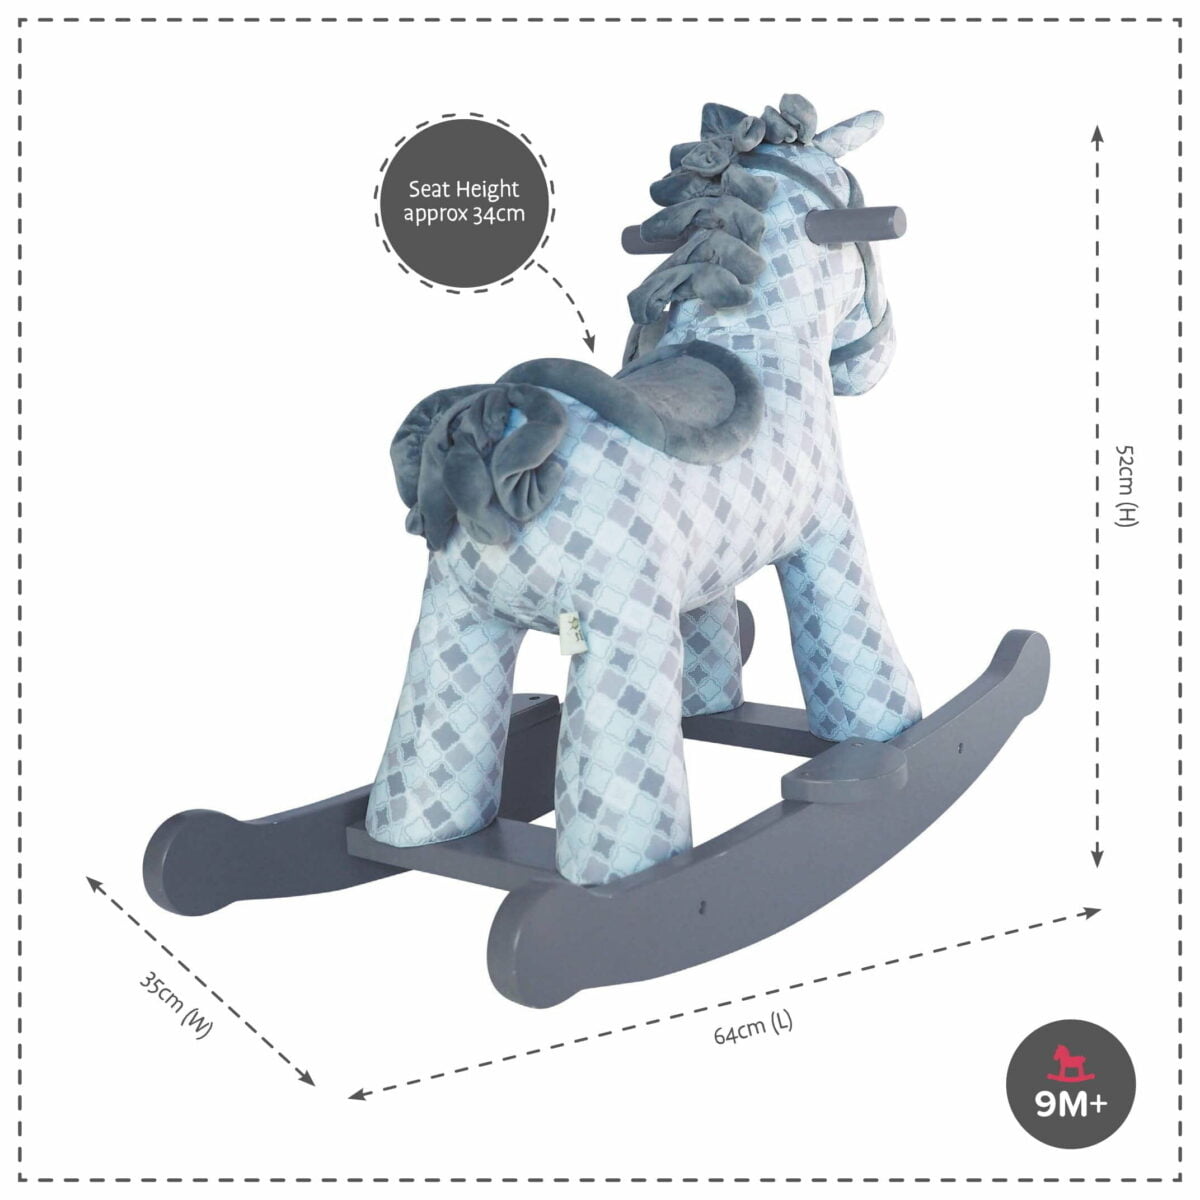 Product dimensions displayed for Harper & Chase Rocking Horse